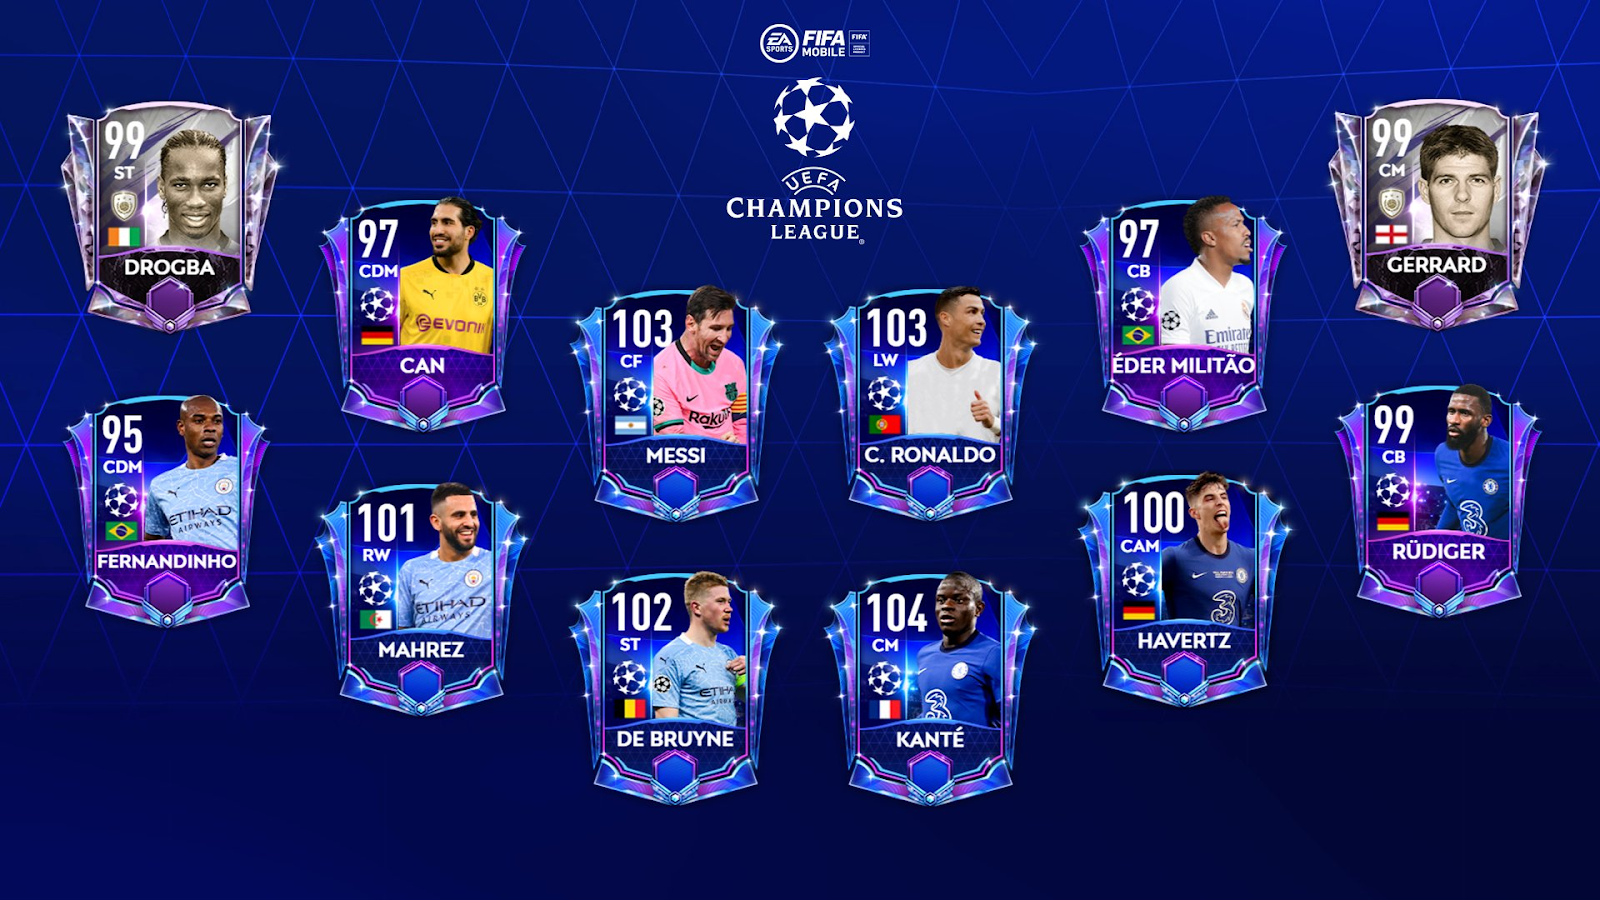 Champions league player cards